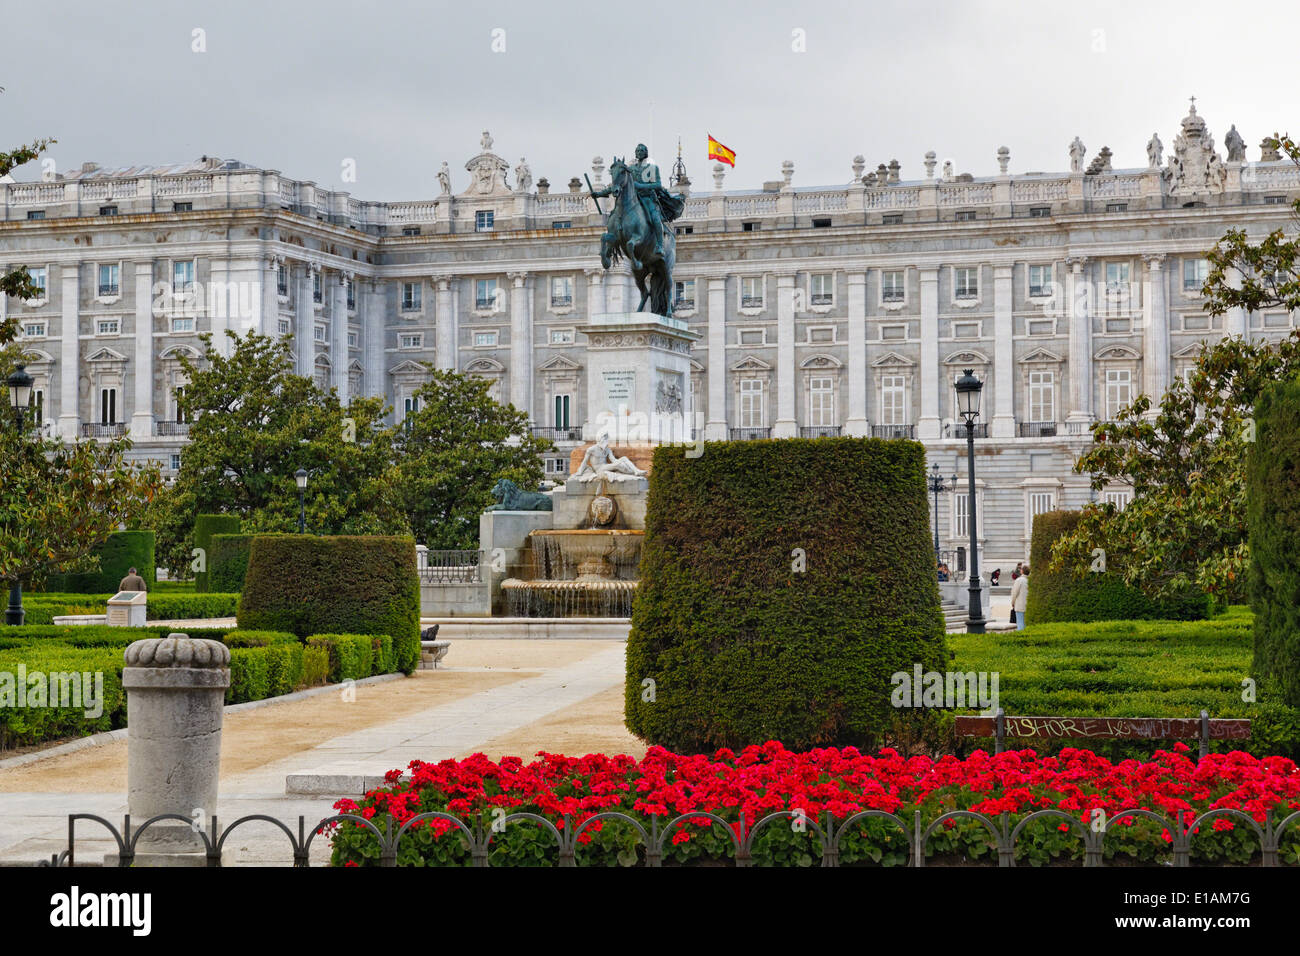 Park with the Equestrian Statue of King Philip IV, Plaza de Oriente, Madrid, Spain Stock Photo